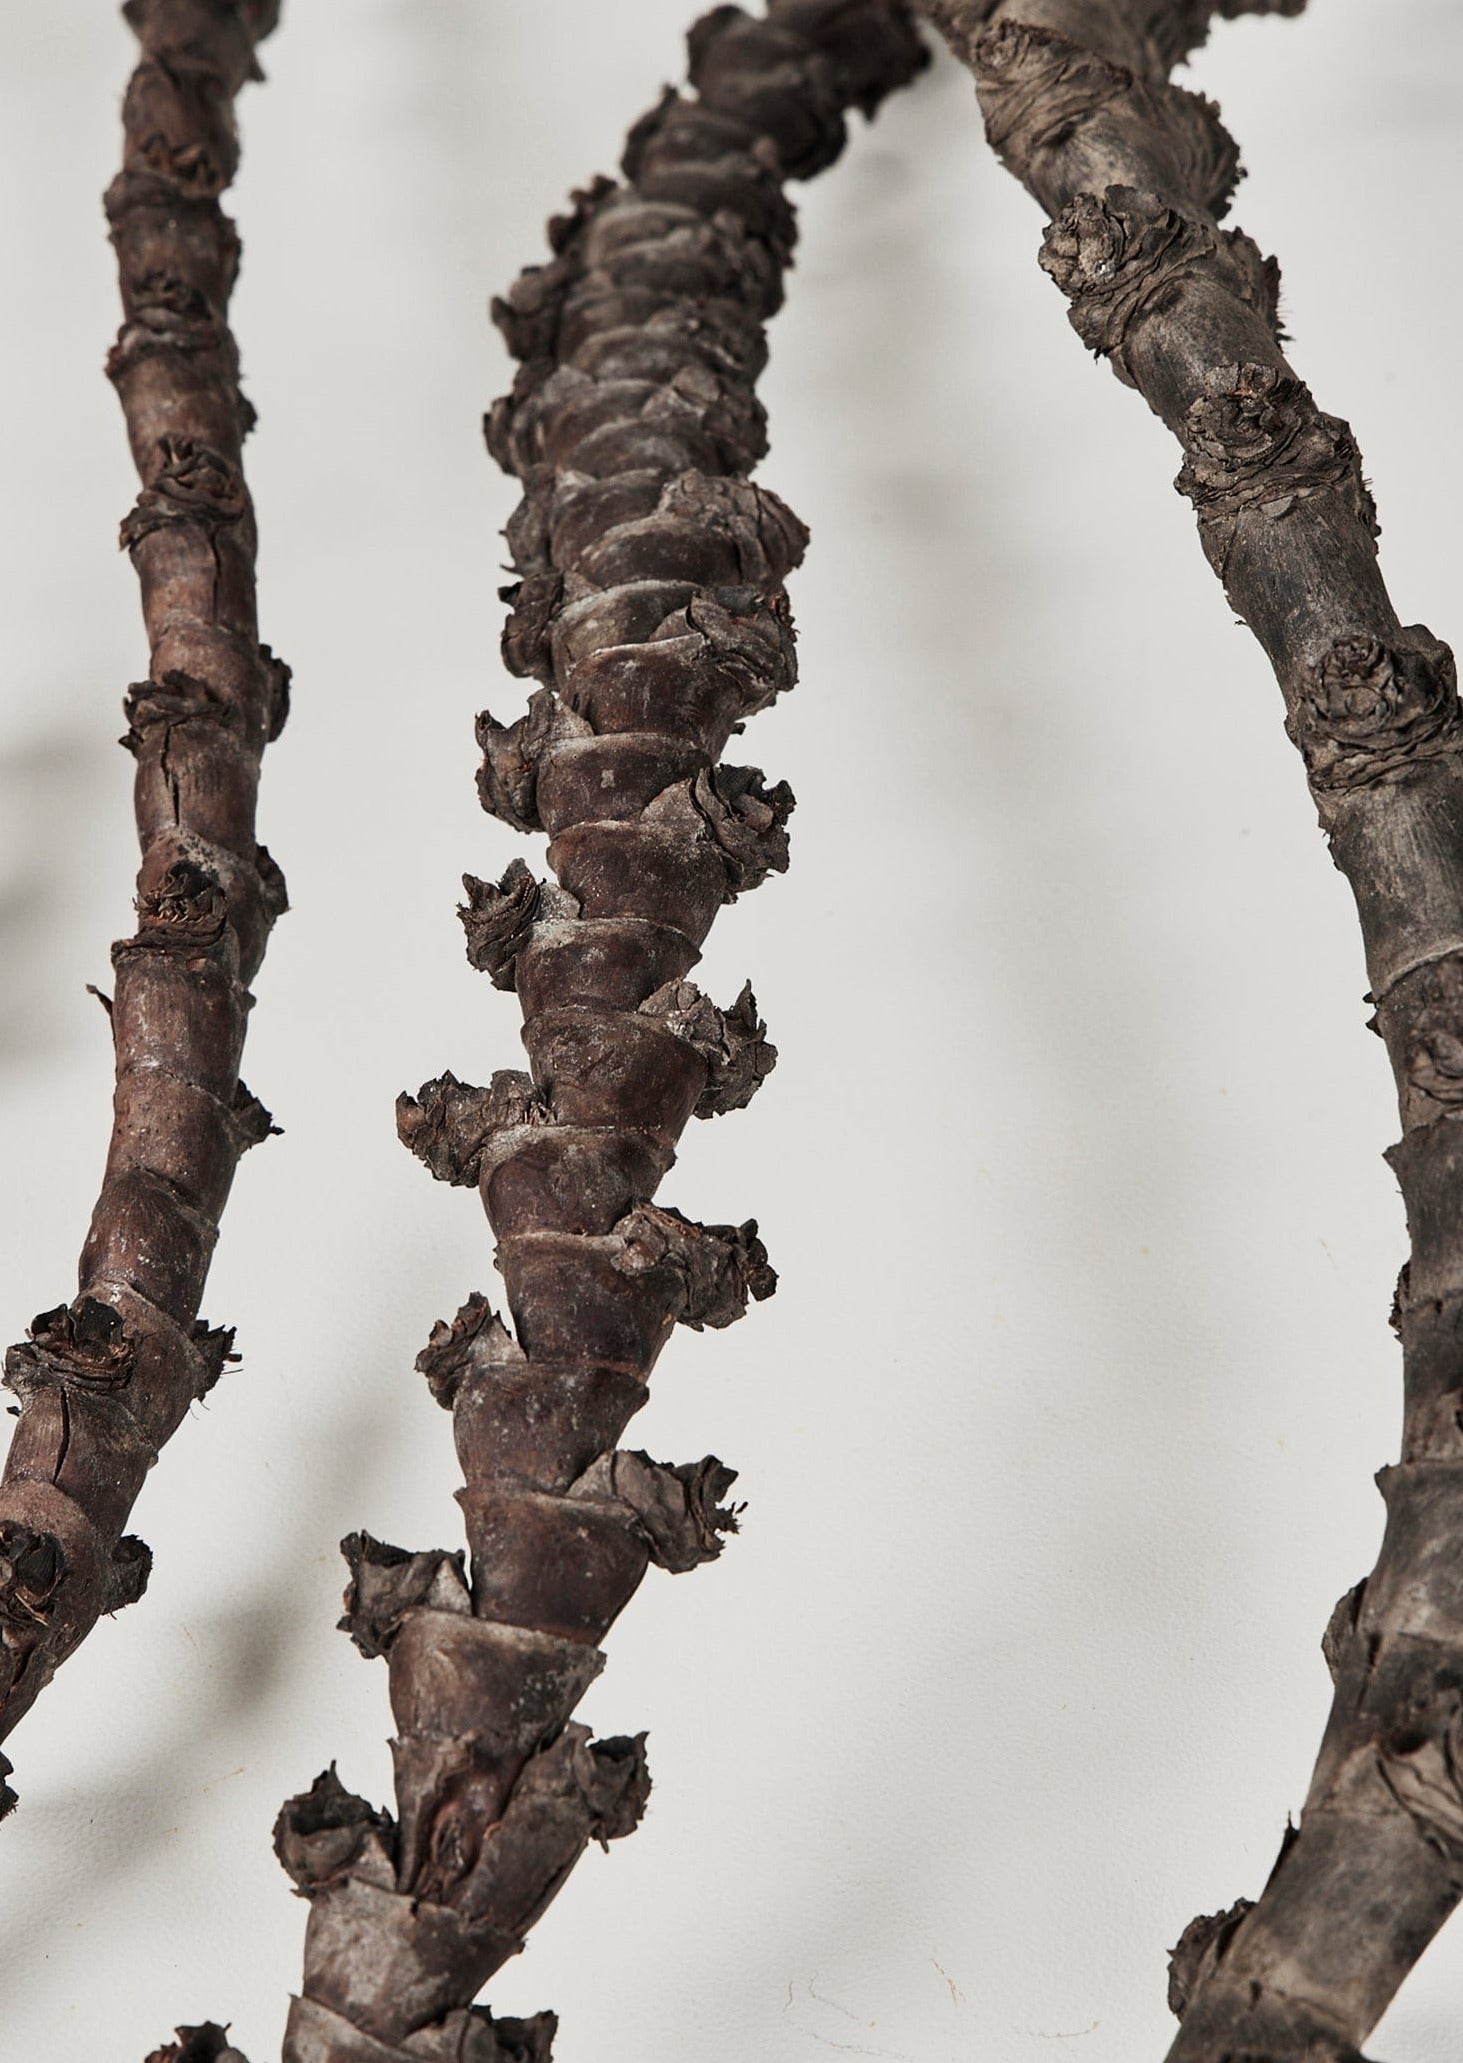 Afloral Natural Brown Dried Curled Ladder Branches in Closeup View